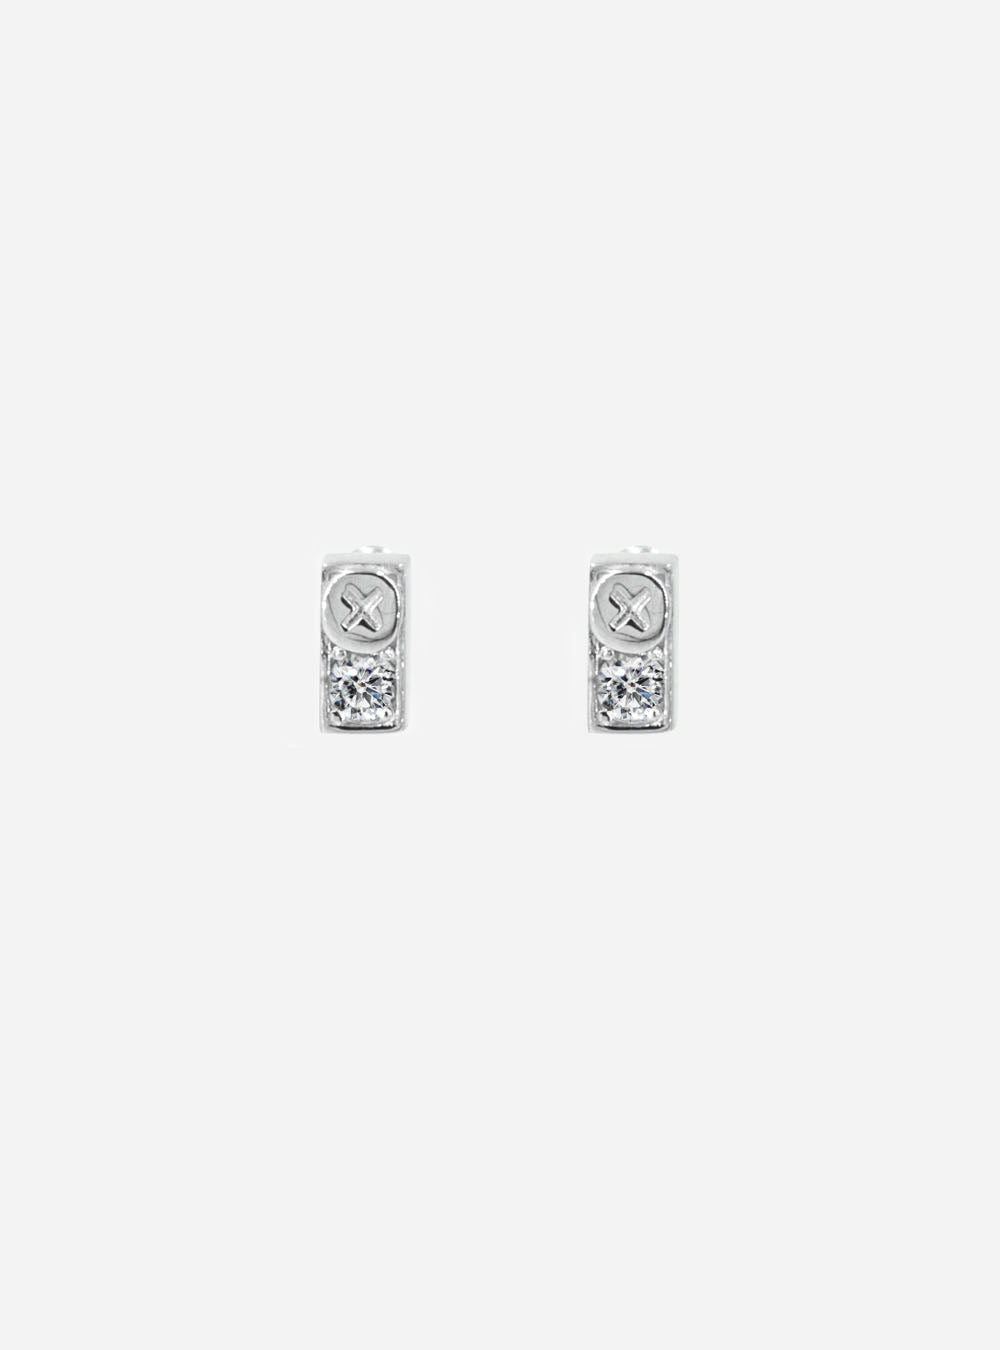 a pair of MIDNIGHTFACTORY Screwbox earrings on a white background.